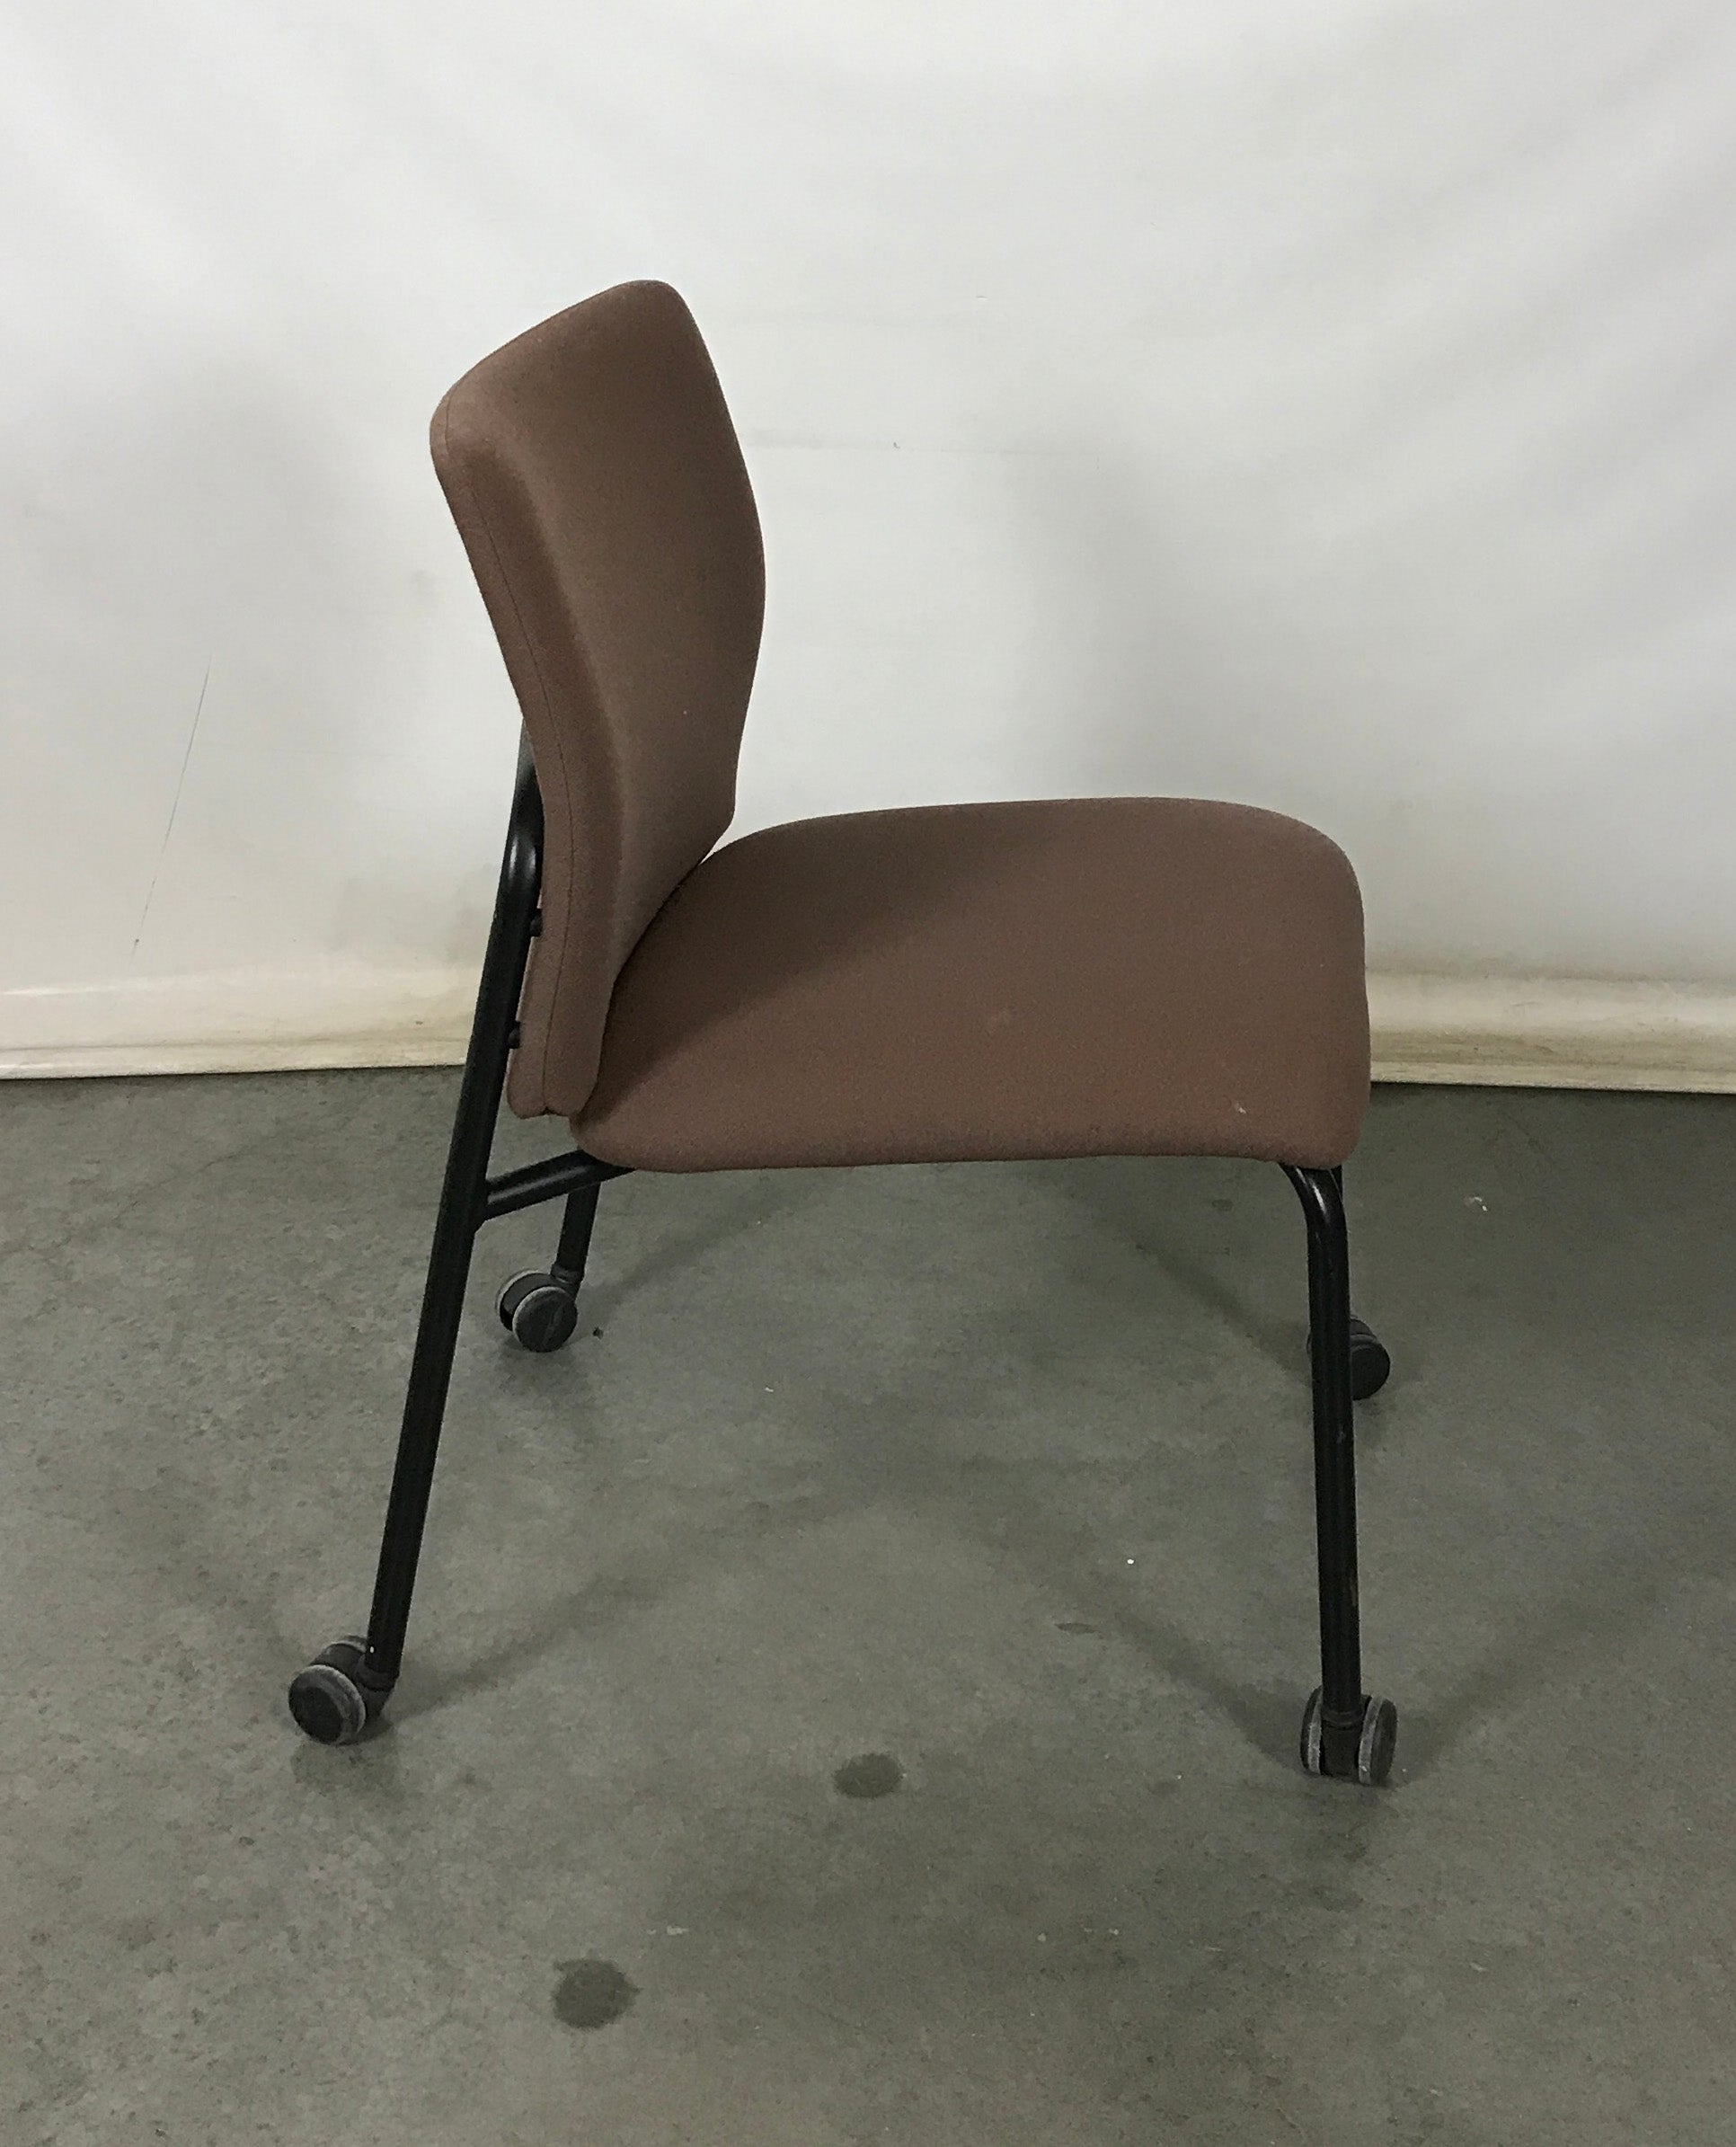 Turnstone Brown Rolling Chair